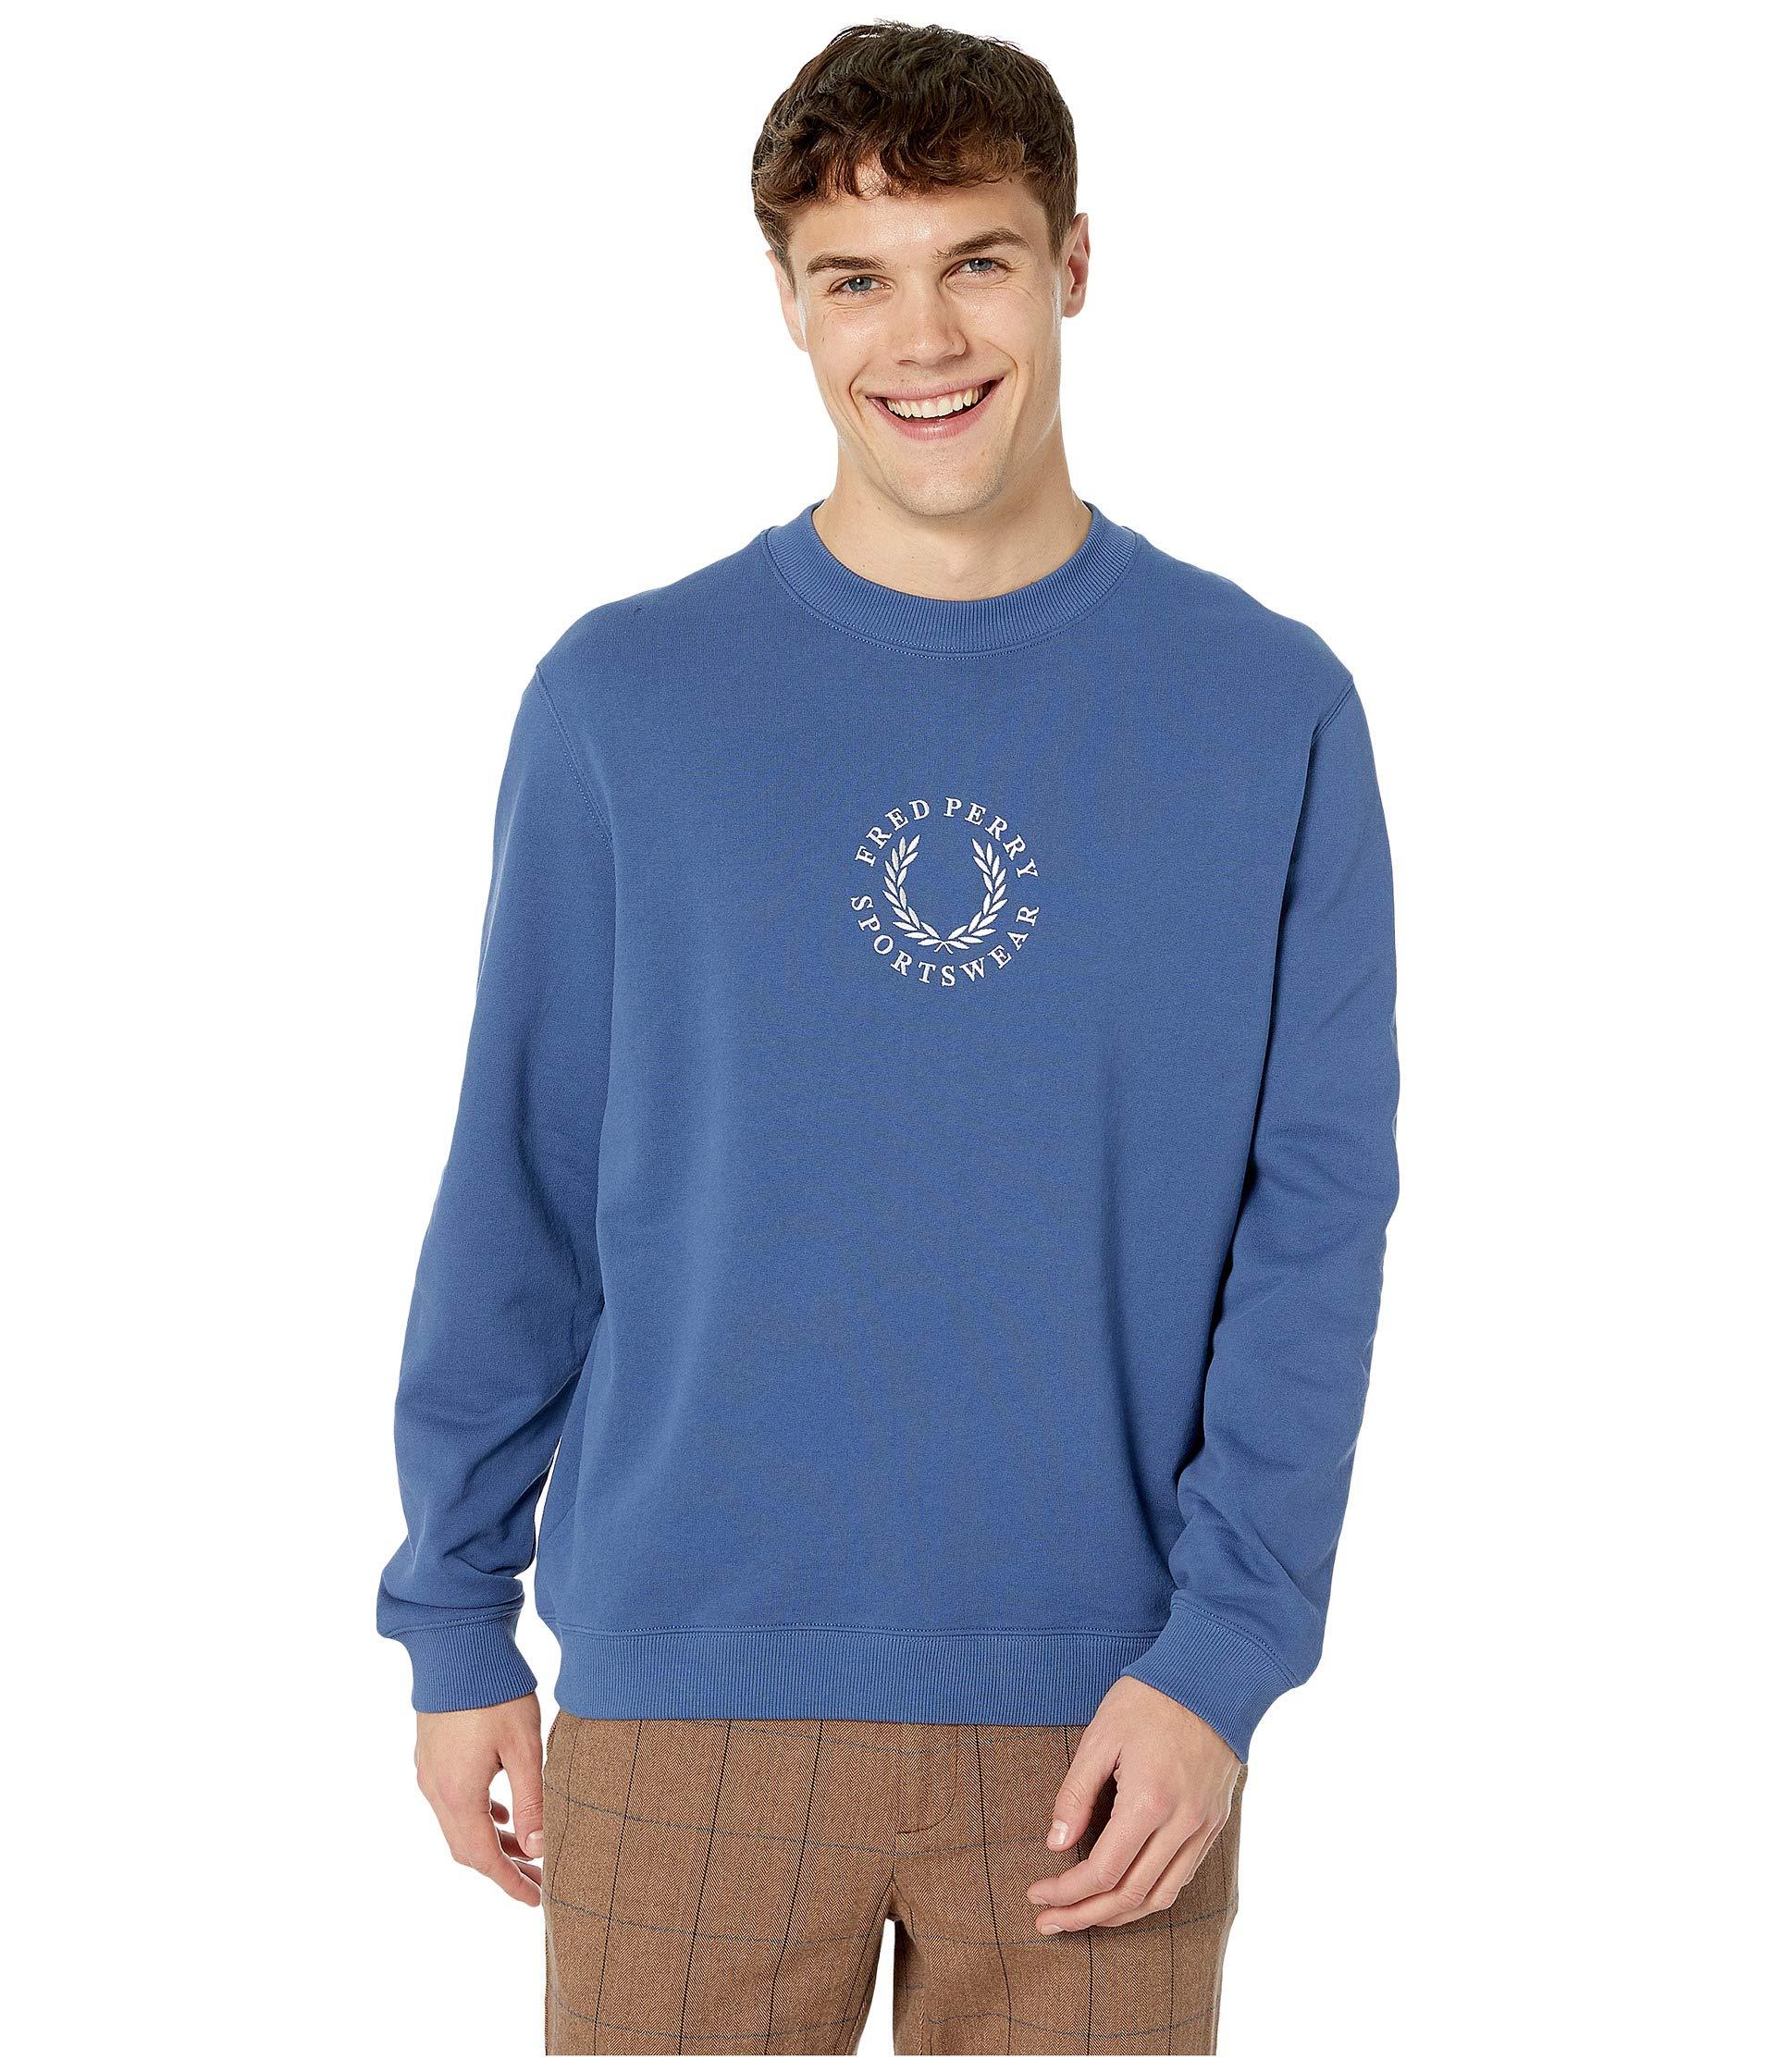 Download Lyst - Fred Perry Crew Neck Logo Sweatshirt Blue in Blue ...